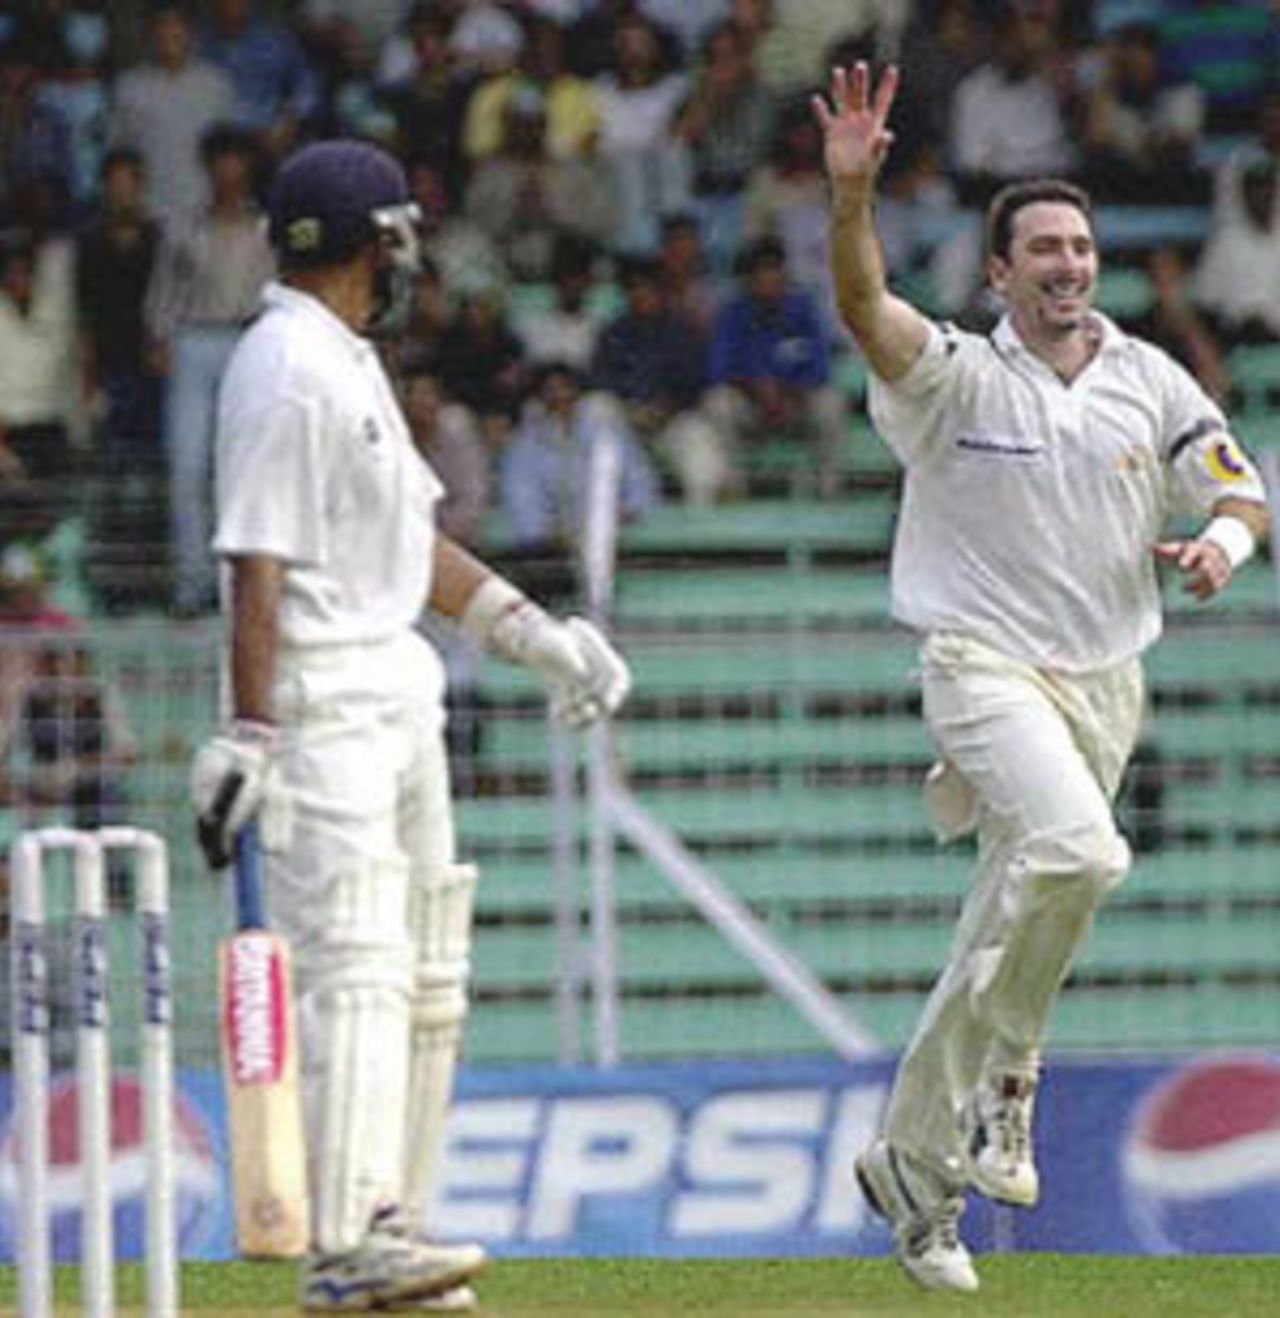 Australian pace bowler Damien Fleming (R) celebrates after claiming the wicket of Indian batsman Rahul Dravid (L) on the first day of the first test match between Indian and Australia at Wankhade stadium in Bombay 27 February 2001. Fleming got Dravid cuaght beind at 9 runs as India were struggling at 62 for 4 at lunch.